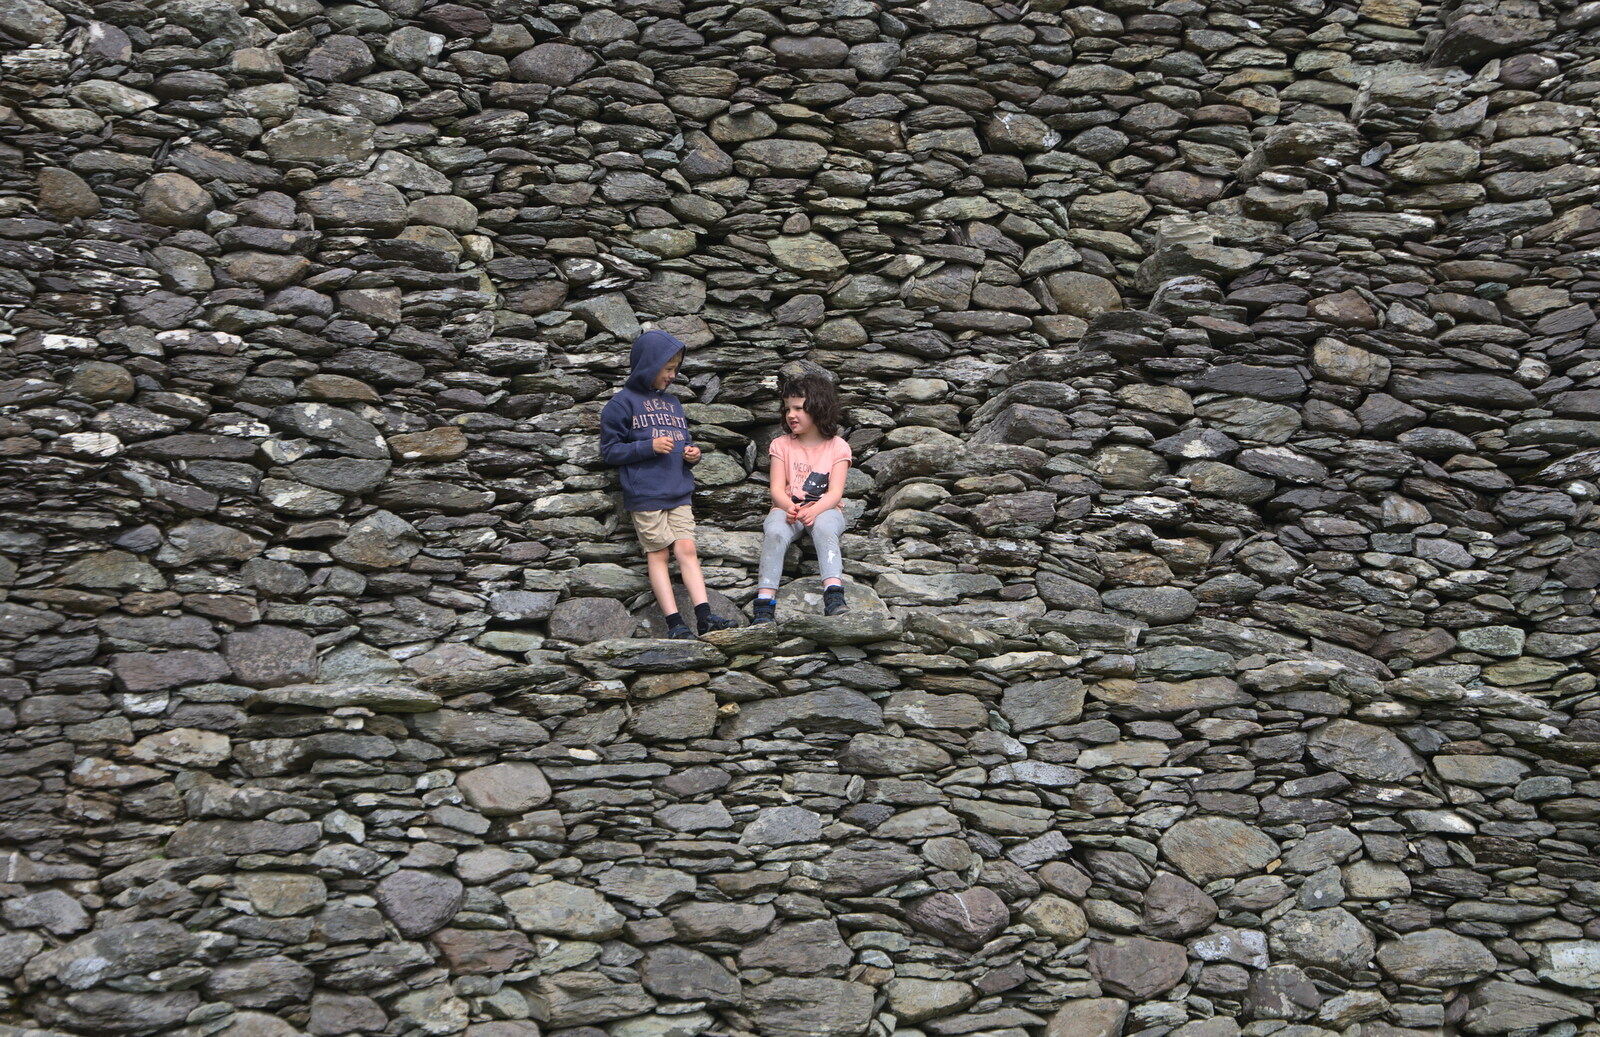 Fred and Fern chat on the wall from Staigue Fort and the Beach, Kerry, Ireland - 2nd August 2017